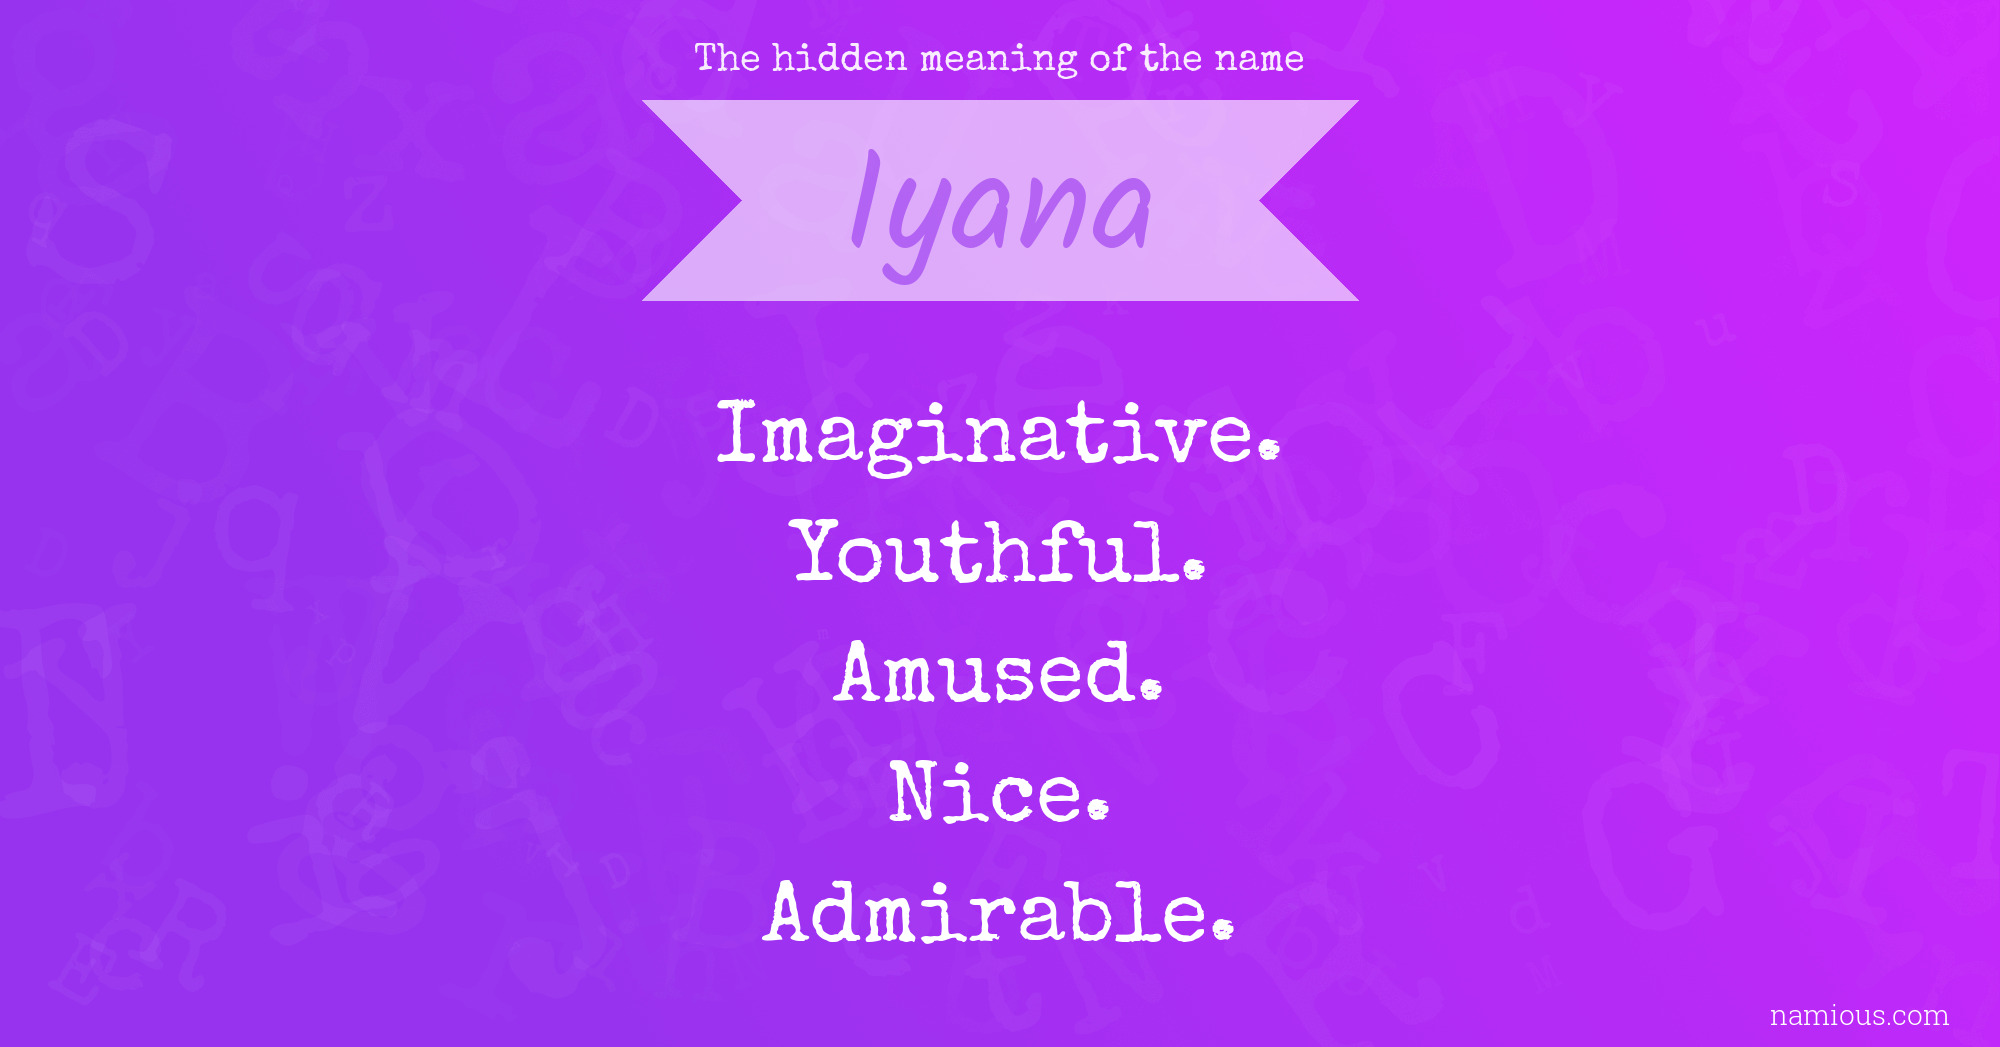 The hidden meaning of the name Iyana